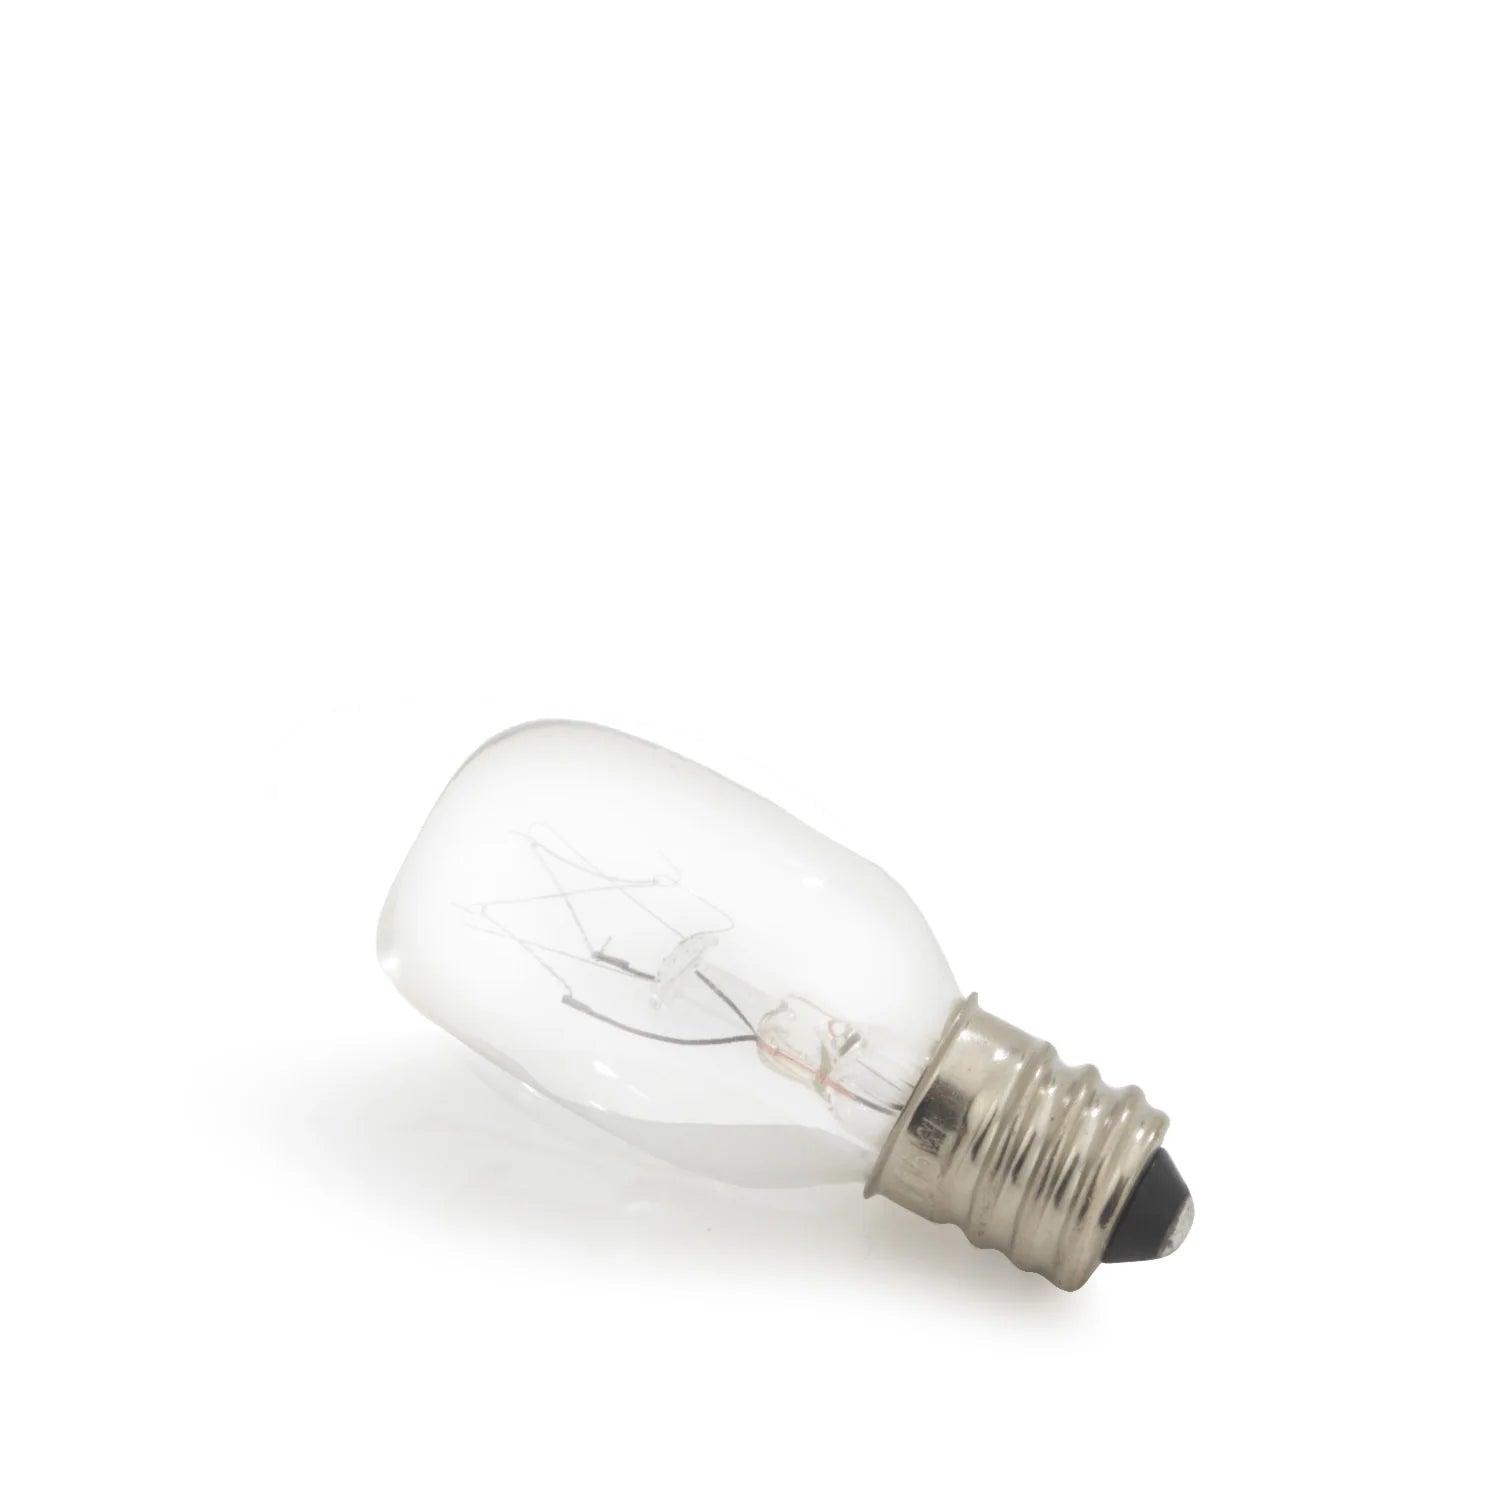 REPLACEMENT BULB FOR MELT BURNERS - Glam Body